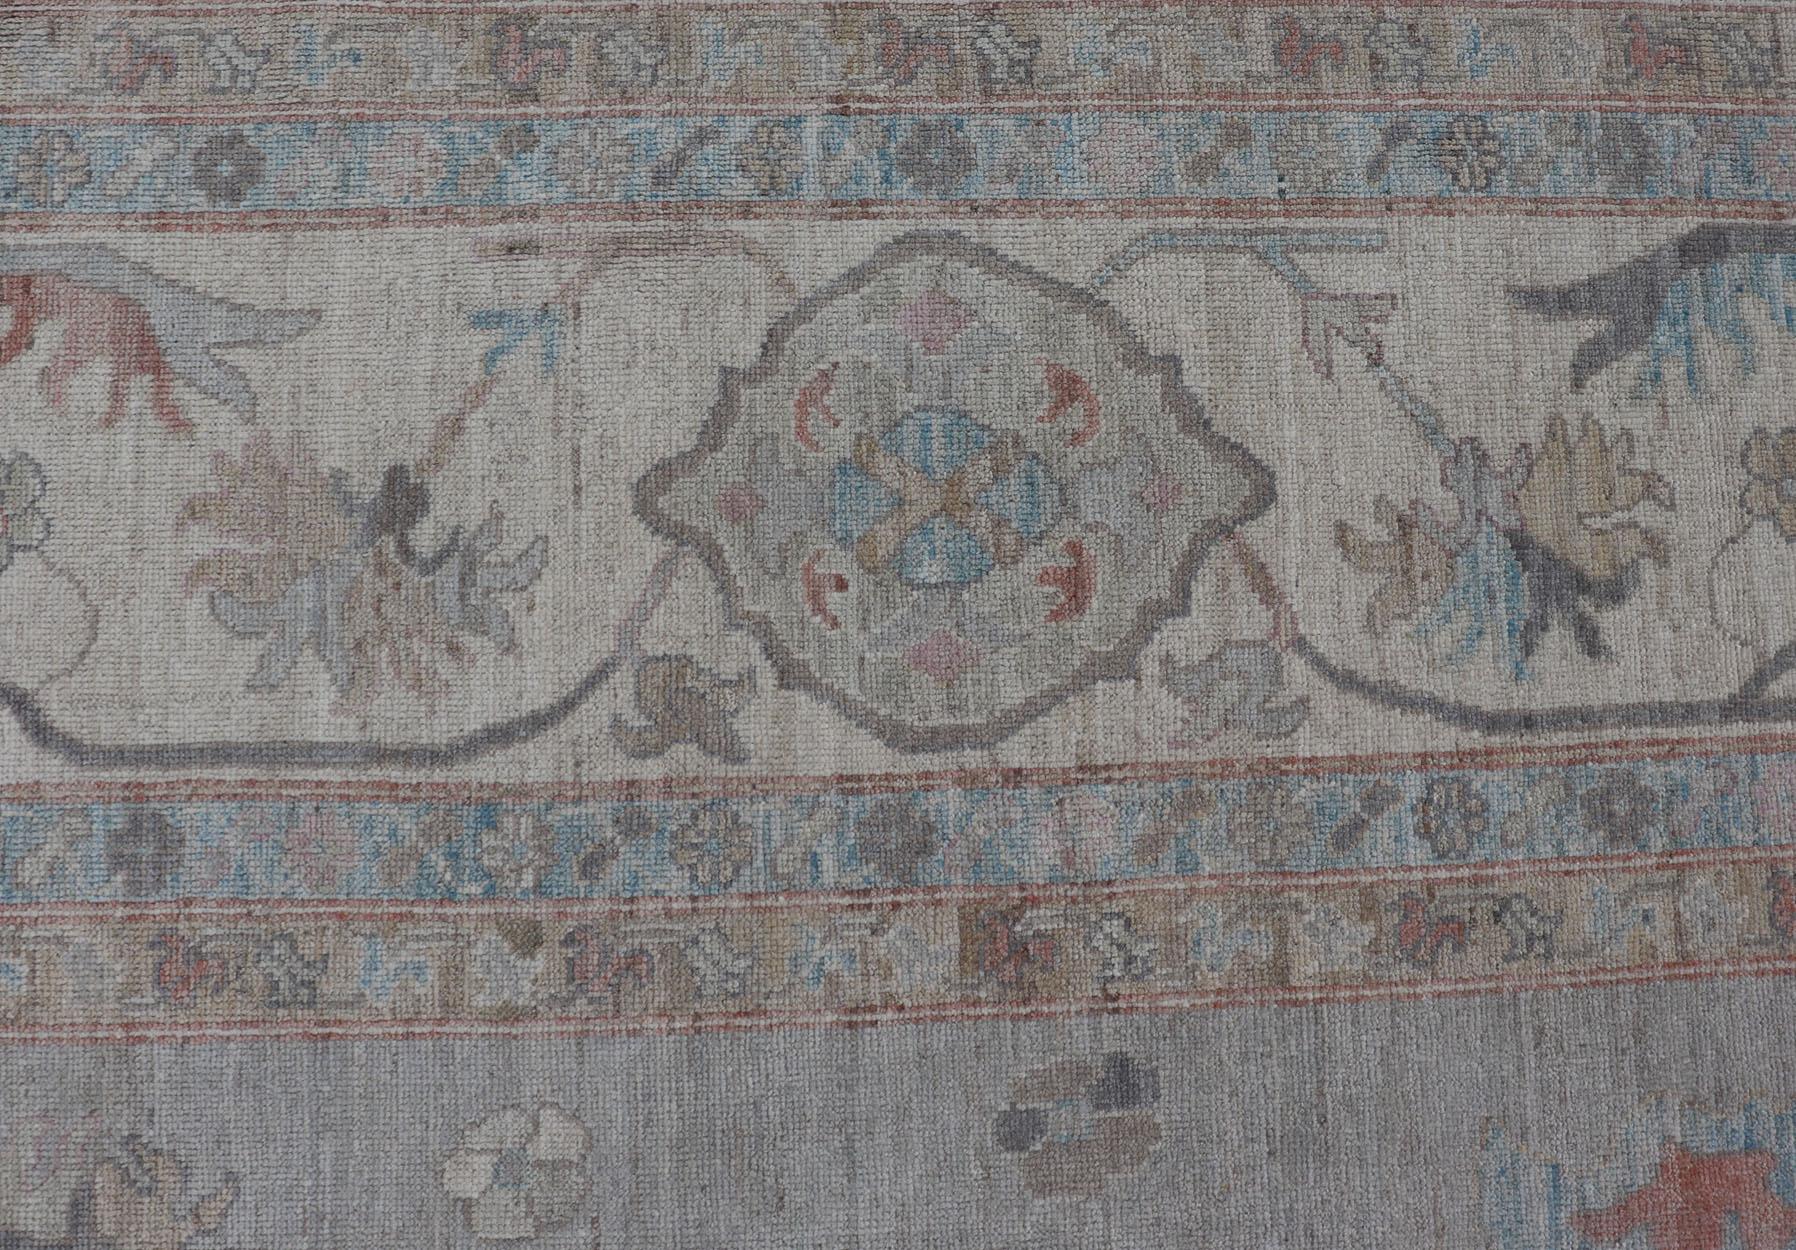 Large Oushak Rug with Floral Motifs & Muted Colorful Tones on Neutral Background and Silver Gray. Keivan Woven Arts; rug AWR-8347 Country of Origin: Afghanistan Type: Oushak Design.

Measures: 12'0 x 17'10 

This large Oushak has a border and